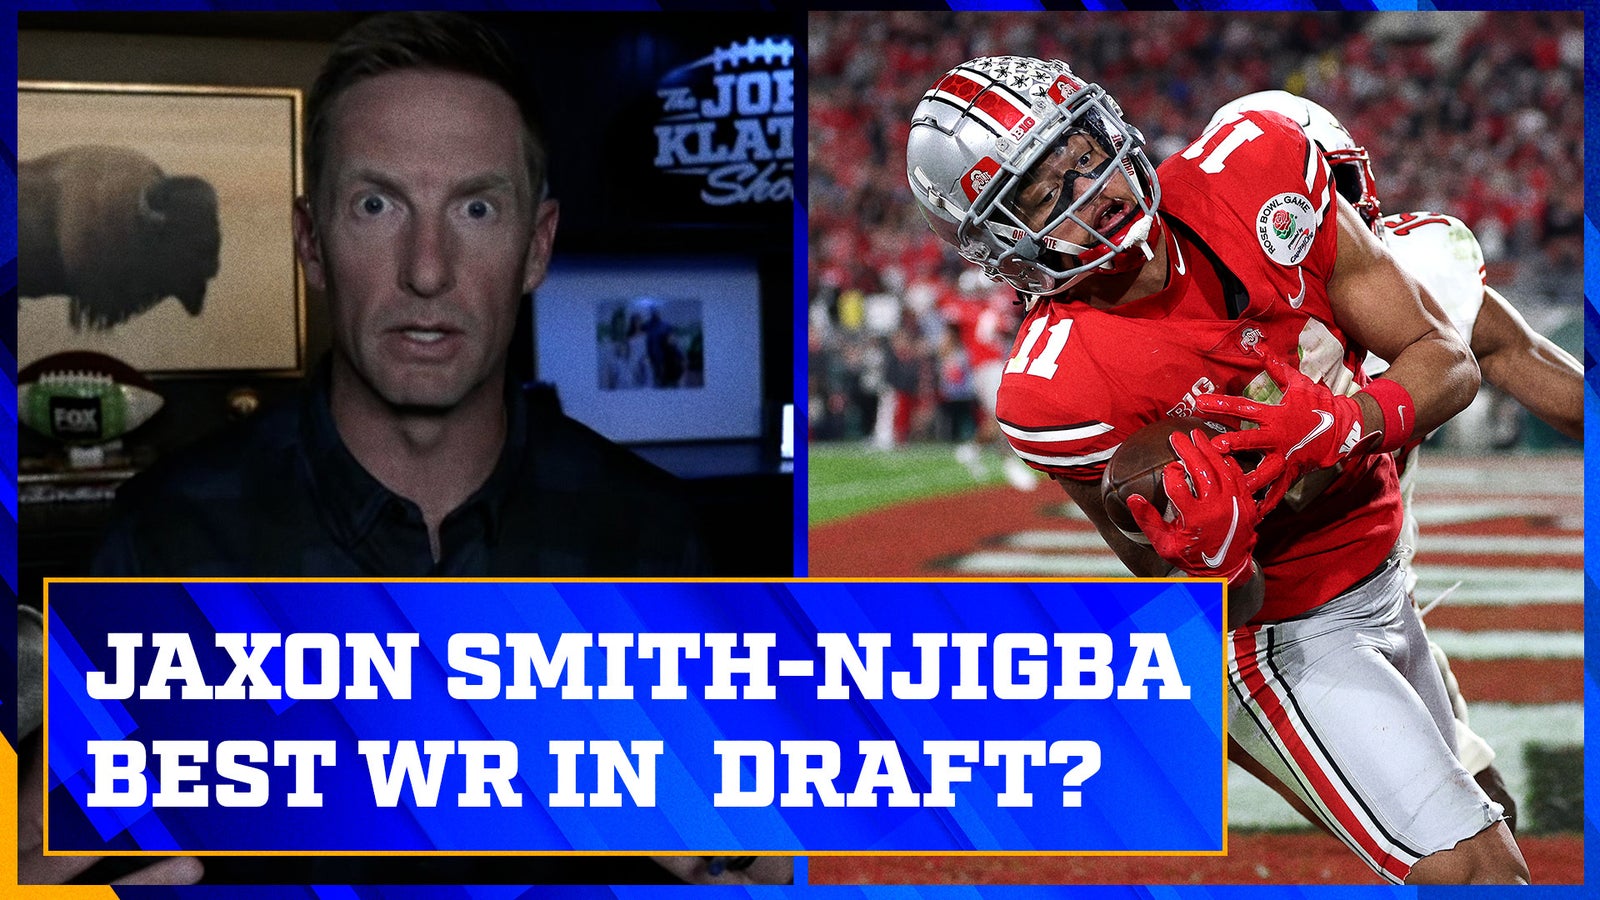 The best Smith-Njigba WR in the draft?